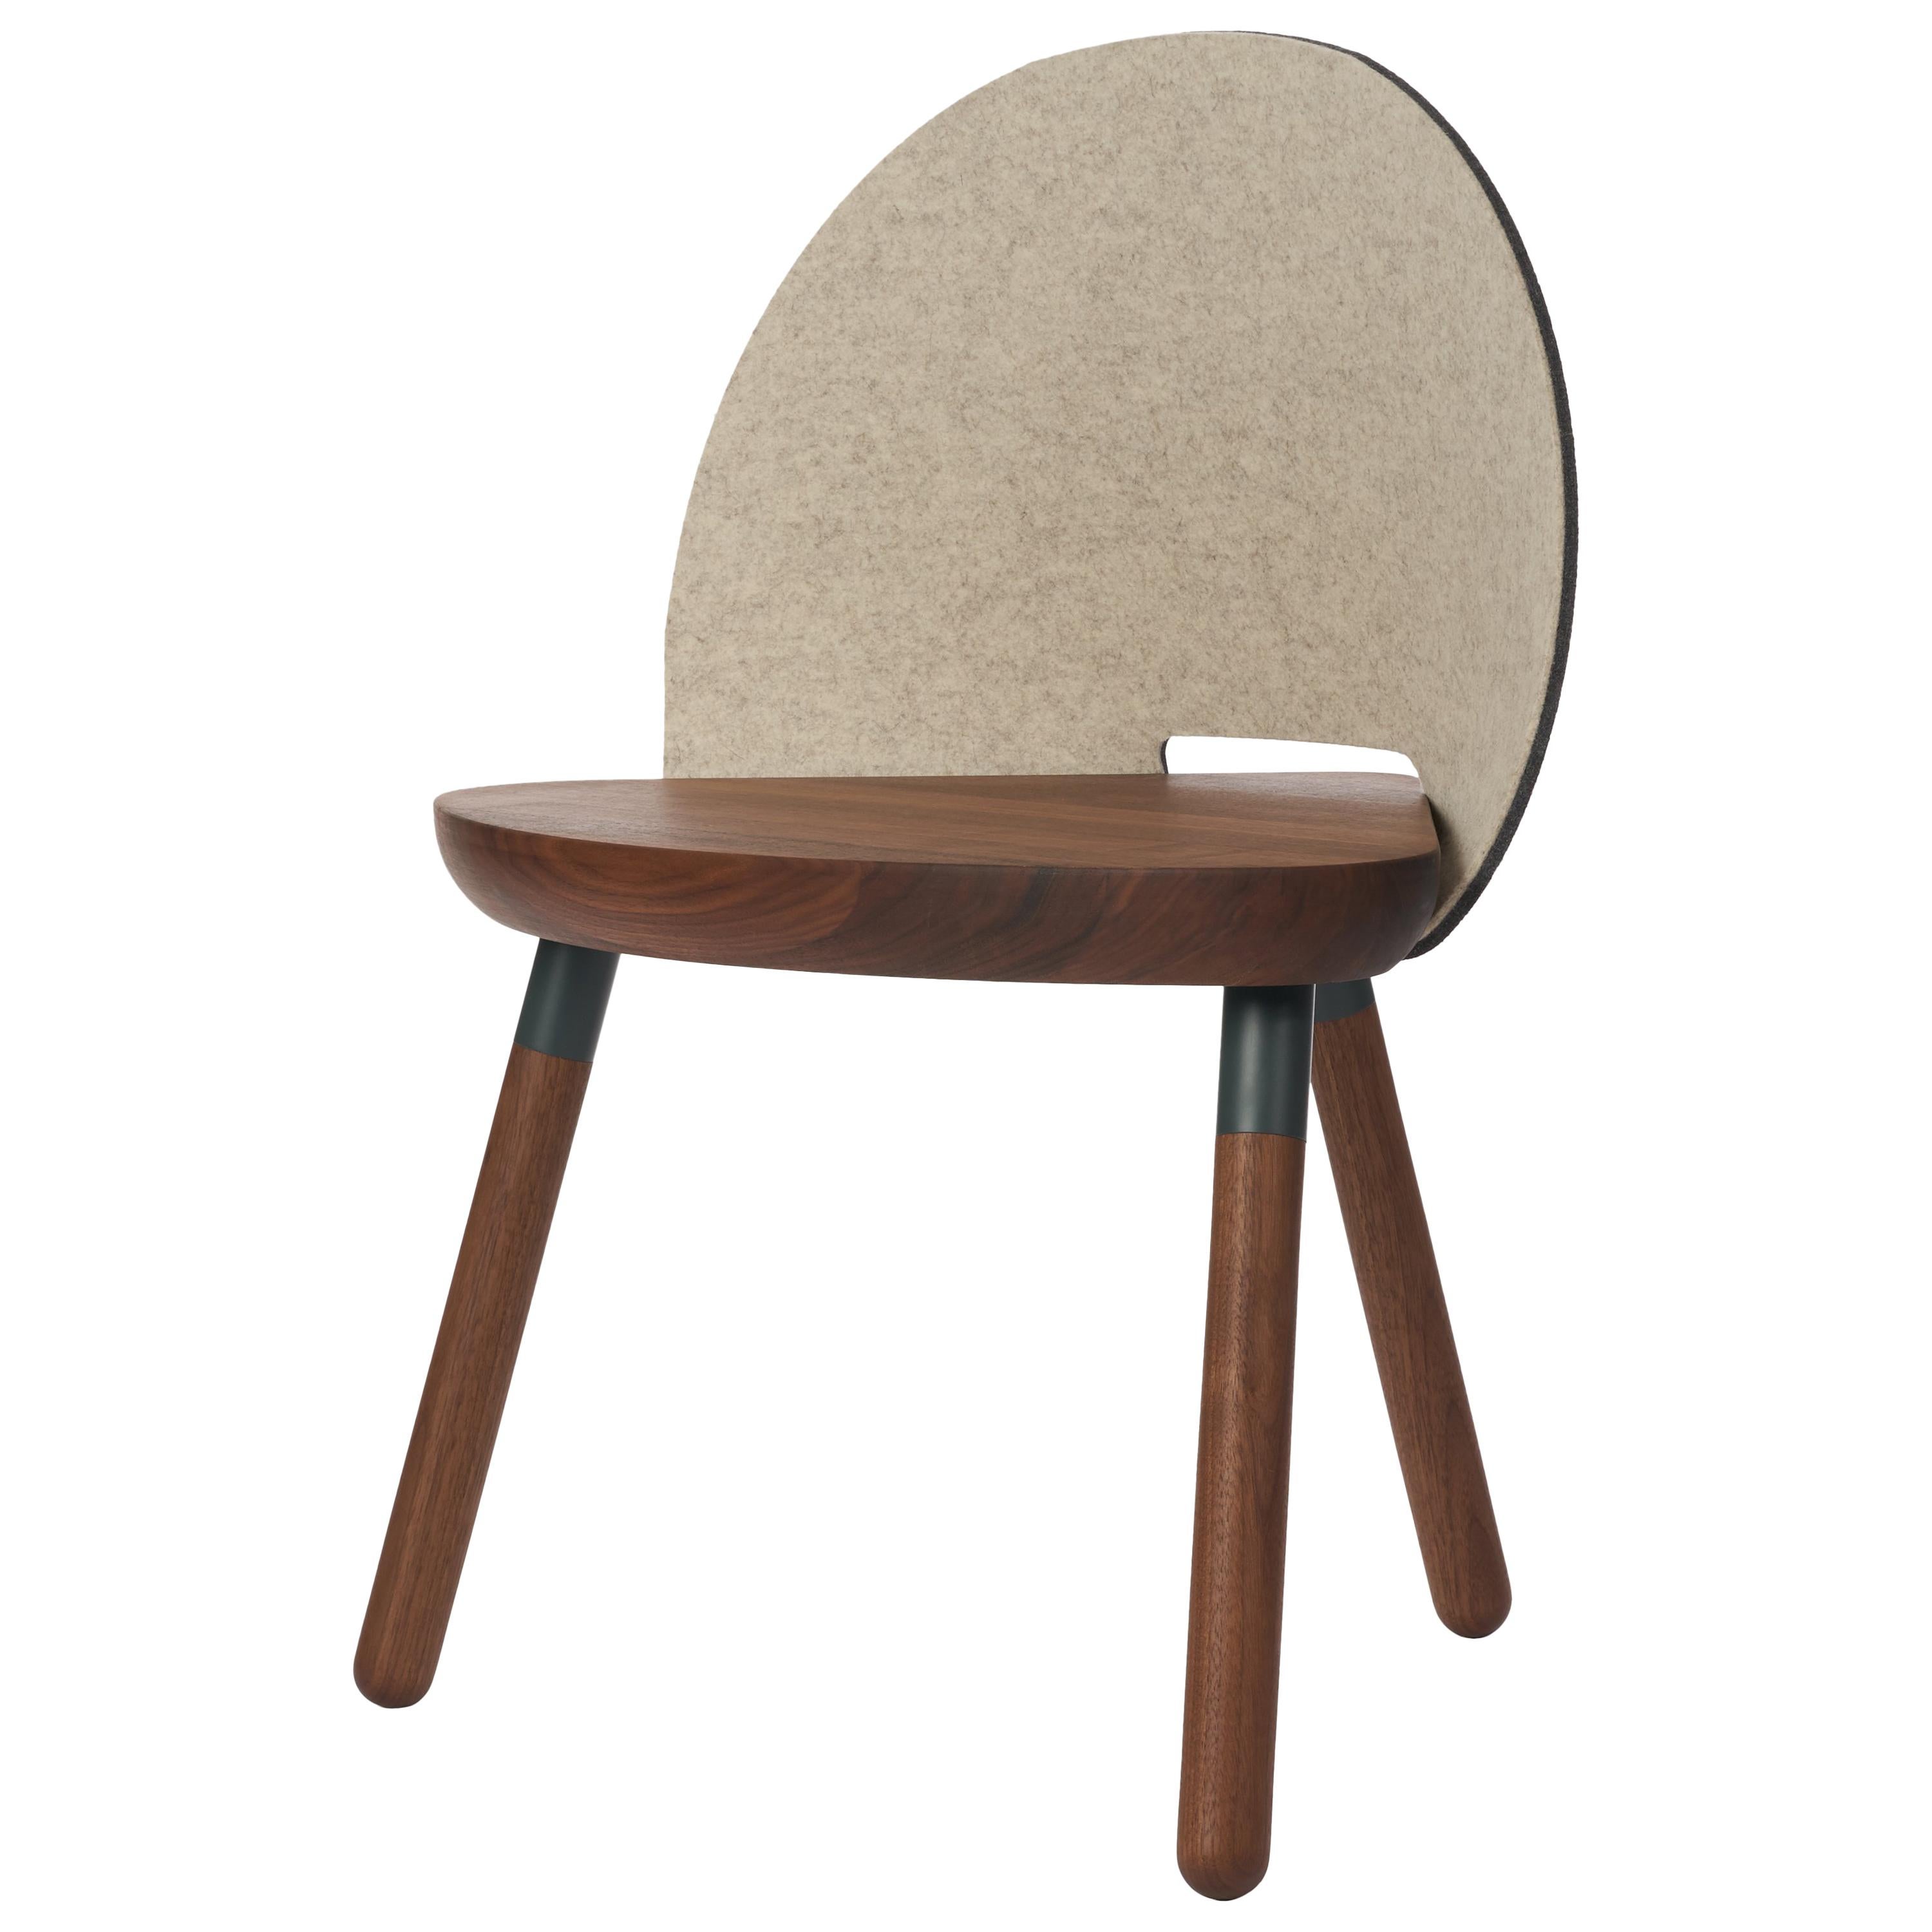 Cinch Chair, Melton Wool, Wood Seat and Eco-Friendly Powder Coated Steel Support im Angebot